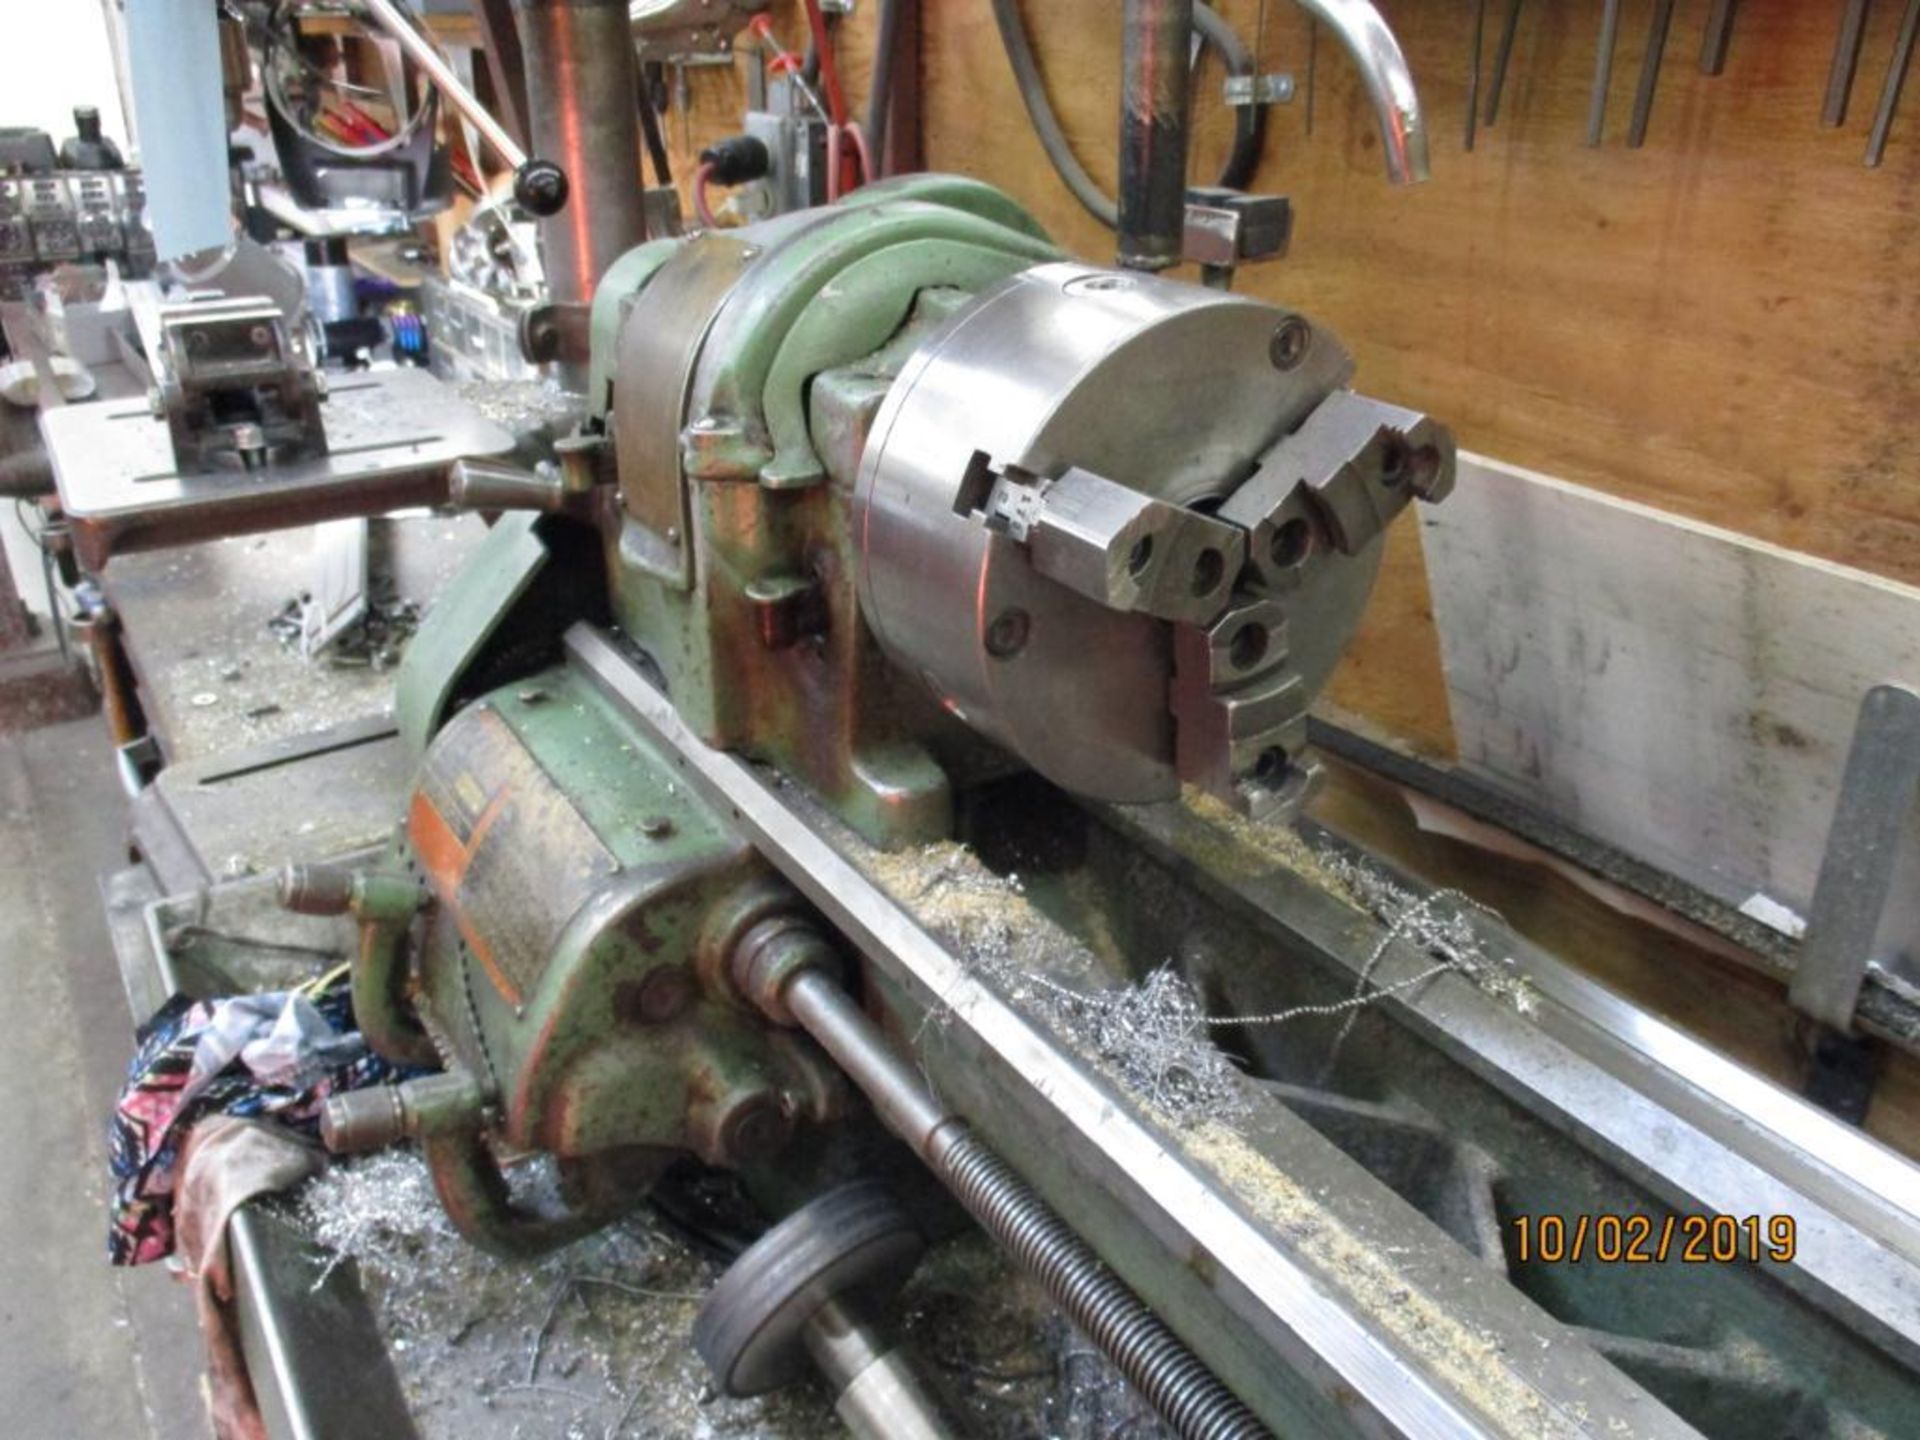 Southbend 10"x4' (est) Cat. No. CL187RB Engine Lathe S/N: 1041RKL14X, 4.5' Bed, 6" Three Jaw Chuck, - Image 3 of 6